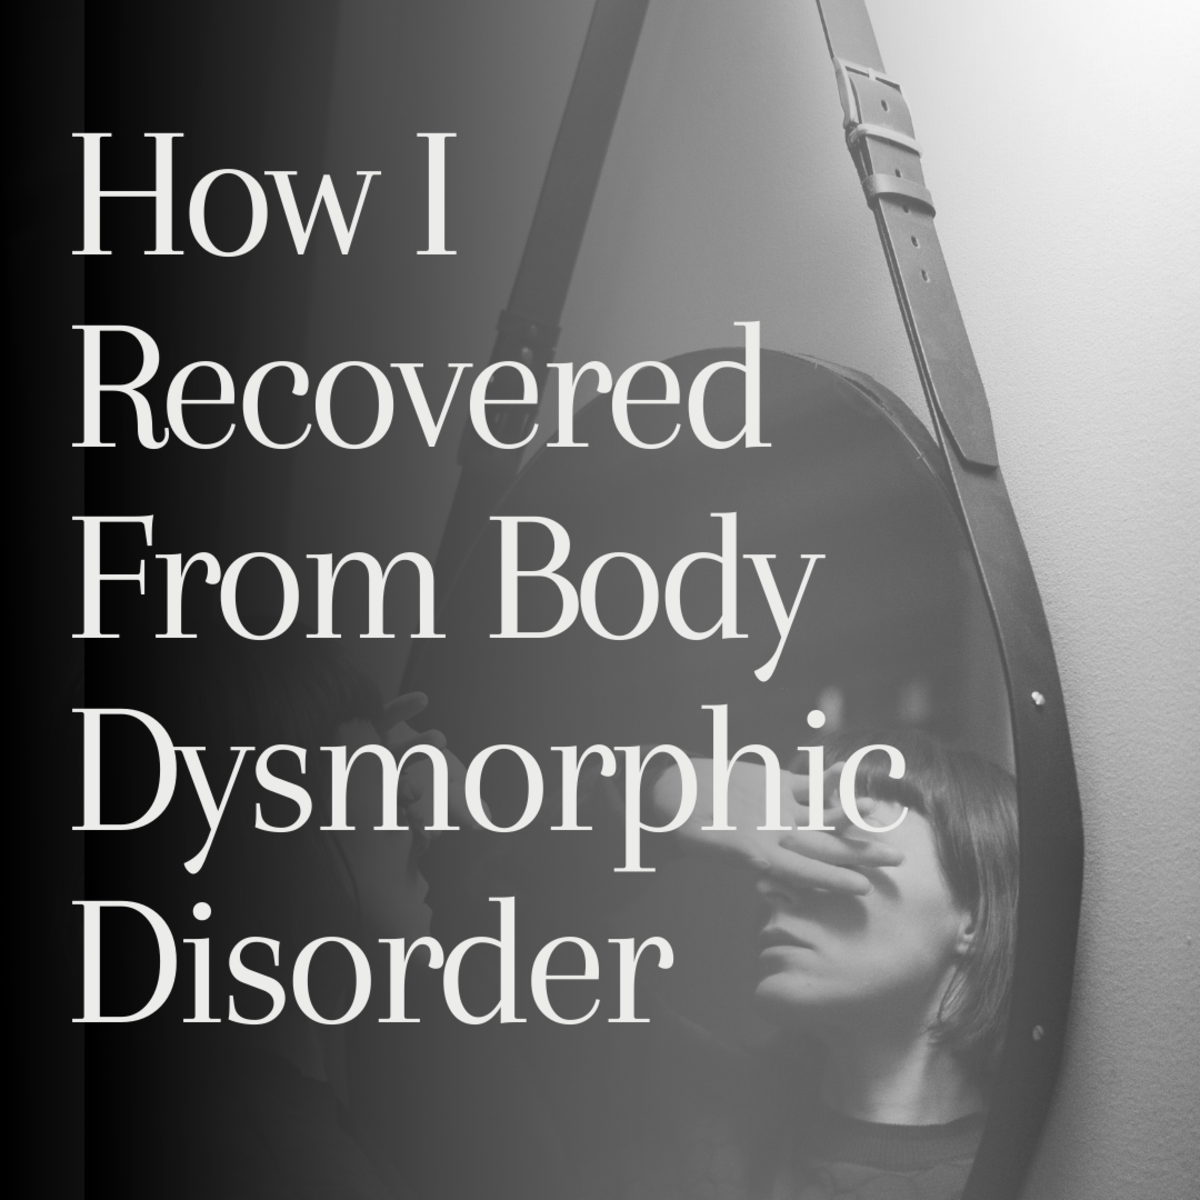 How I Recovered From Body Dysmorphic Disorder (What I Learnt About Happiness)